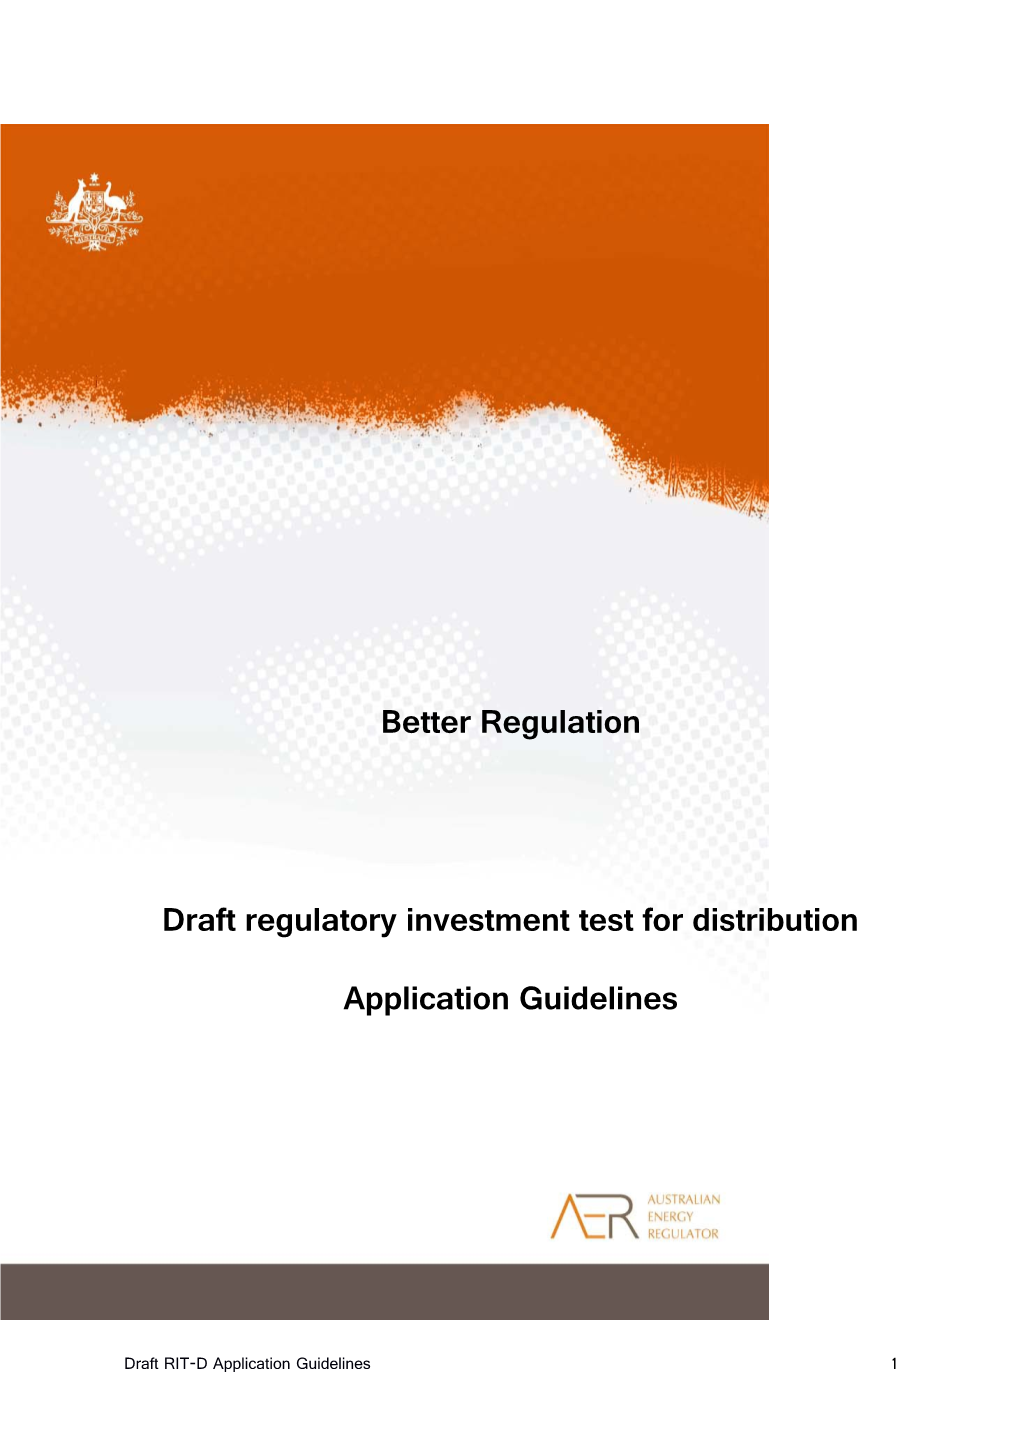 Draft Regulatory Investment Test for Distributionapplication Guidelines